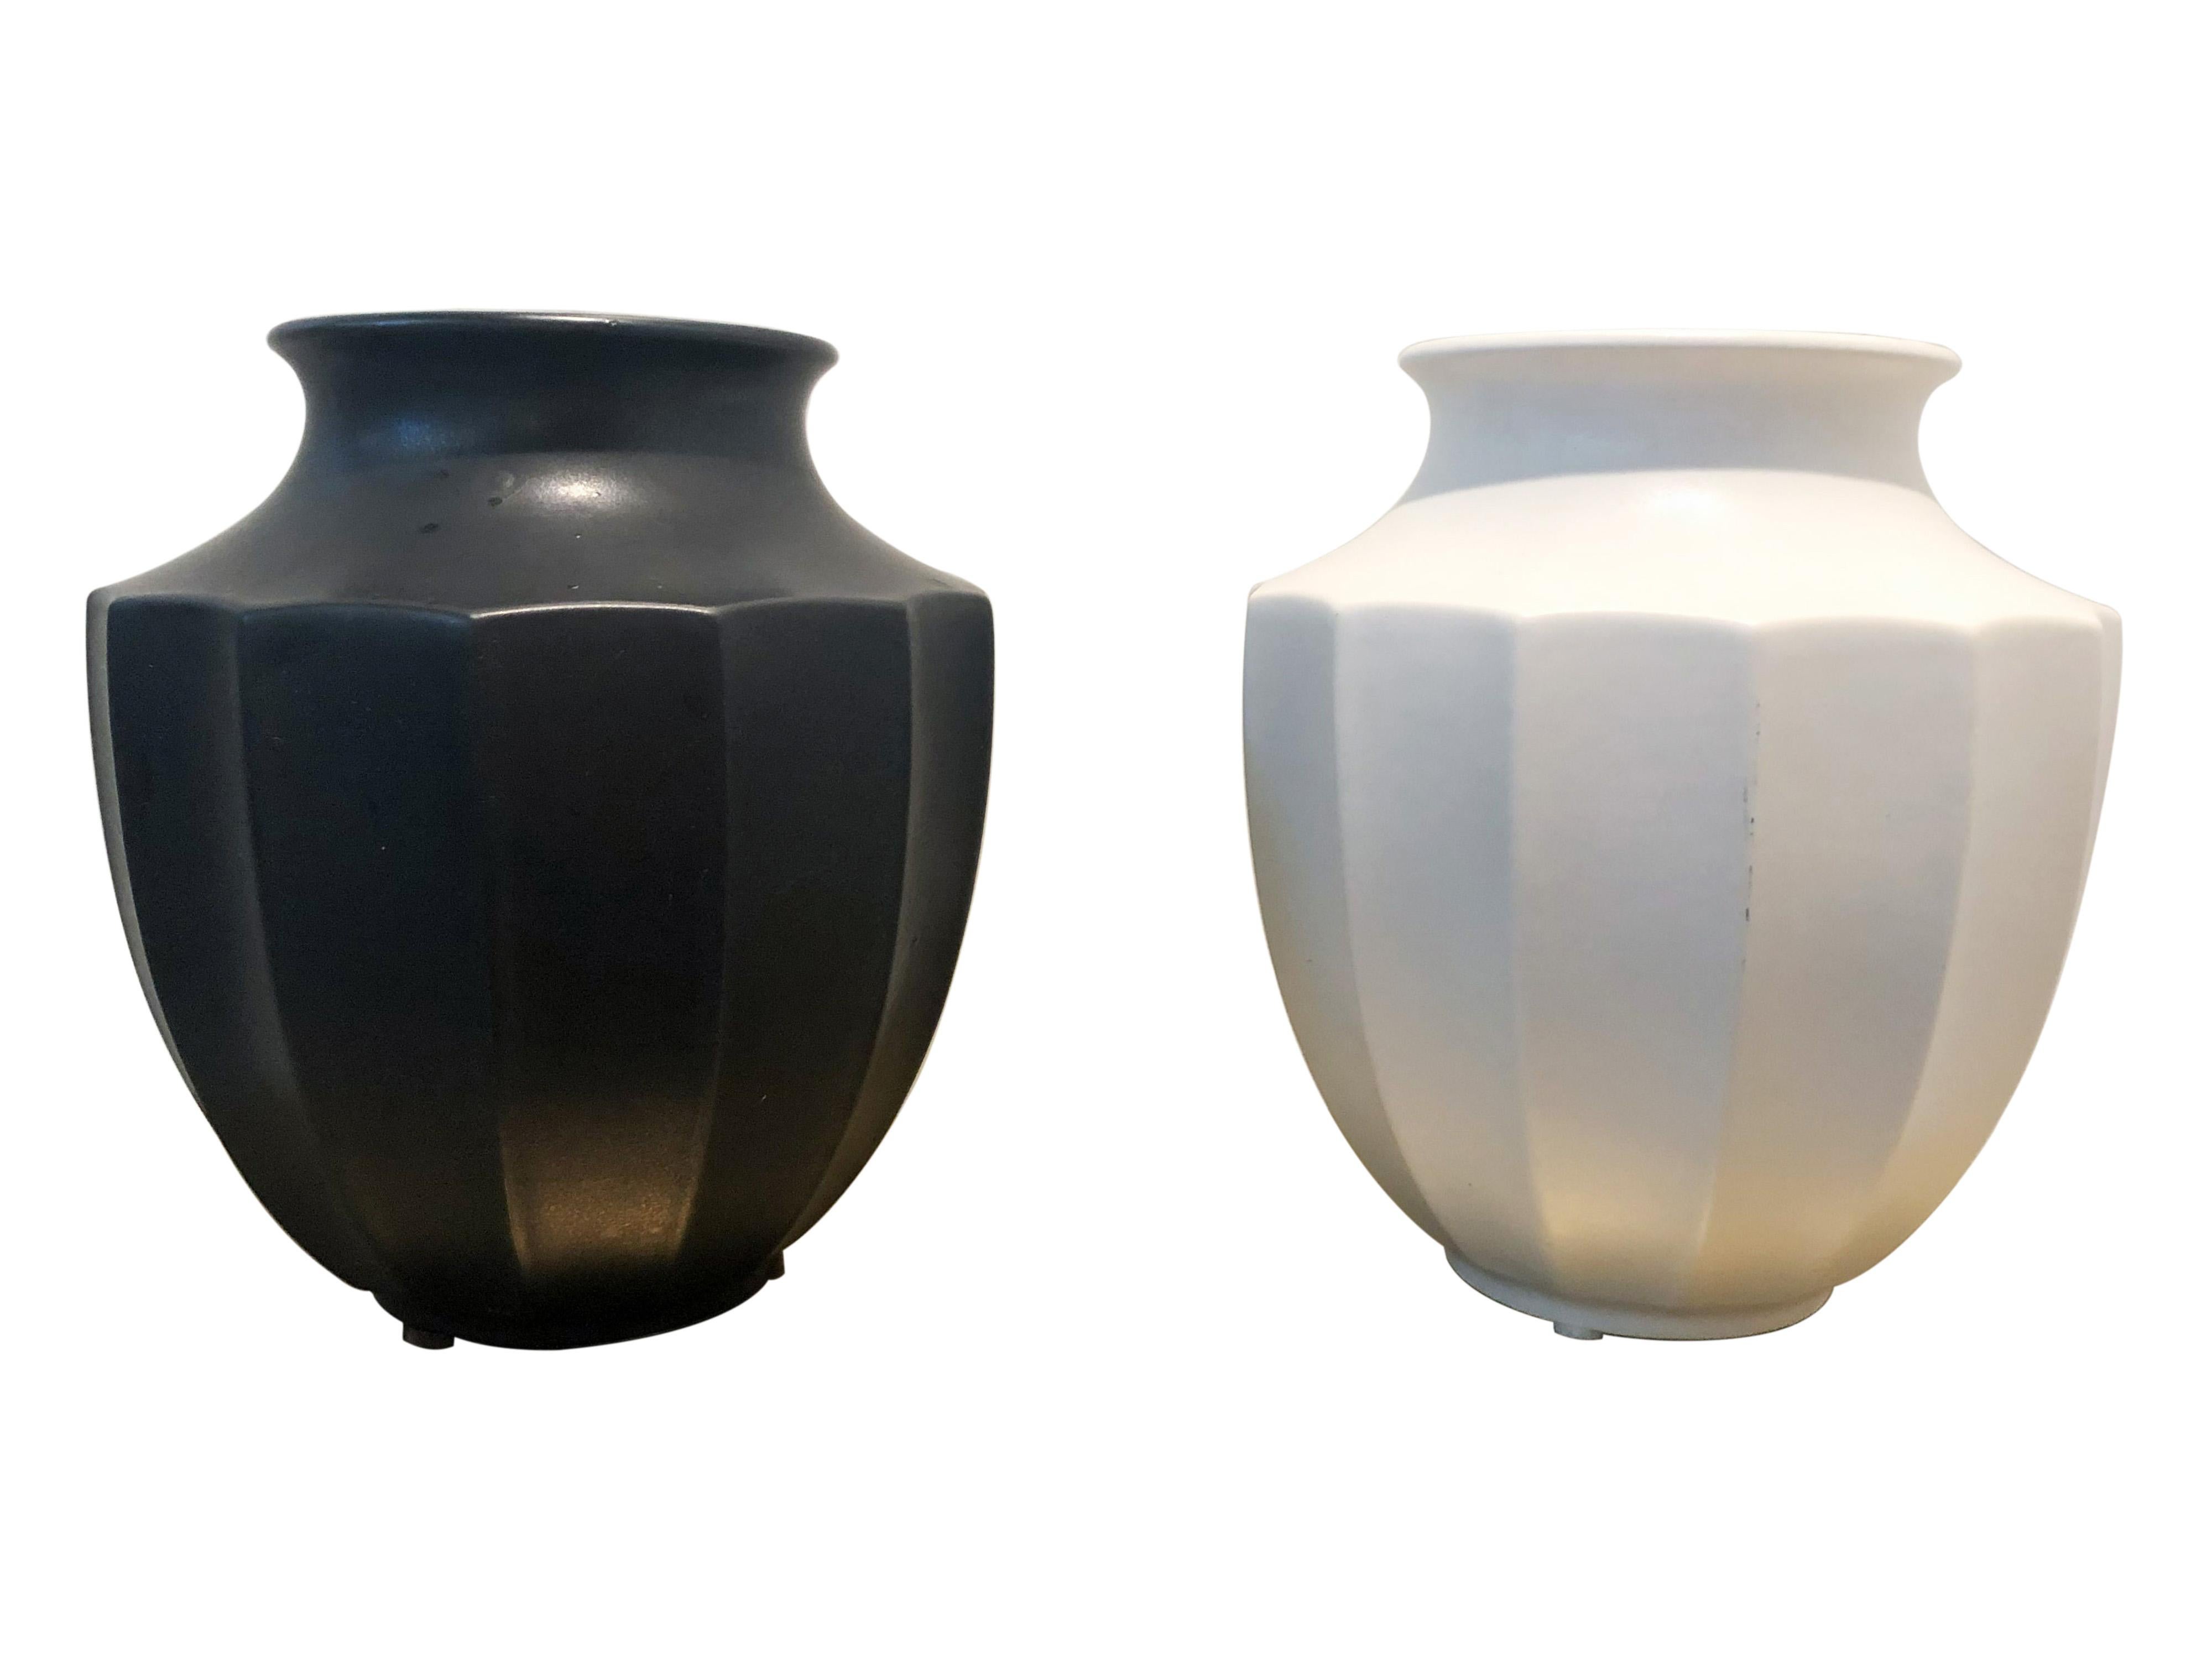 Pair of American midcentury ceramic black and white vases/urns with ridged sides and a matte finish. Top is 4.25